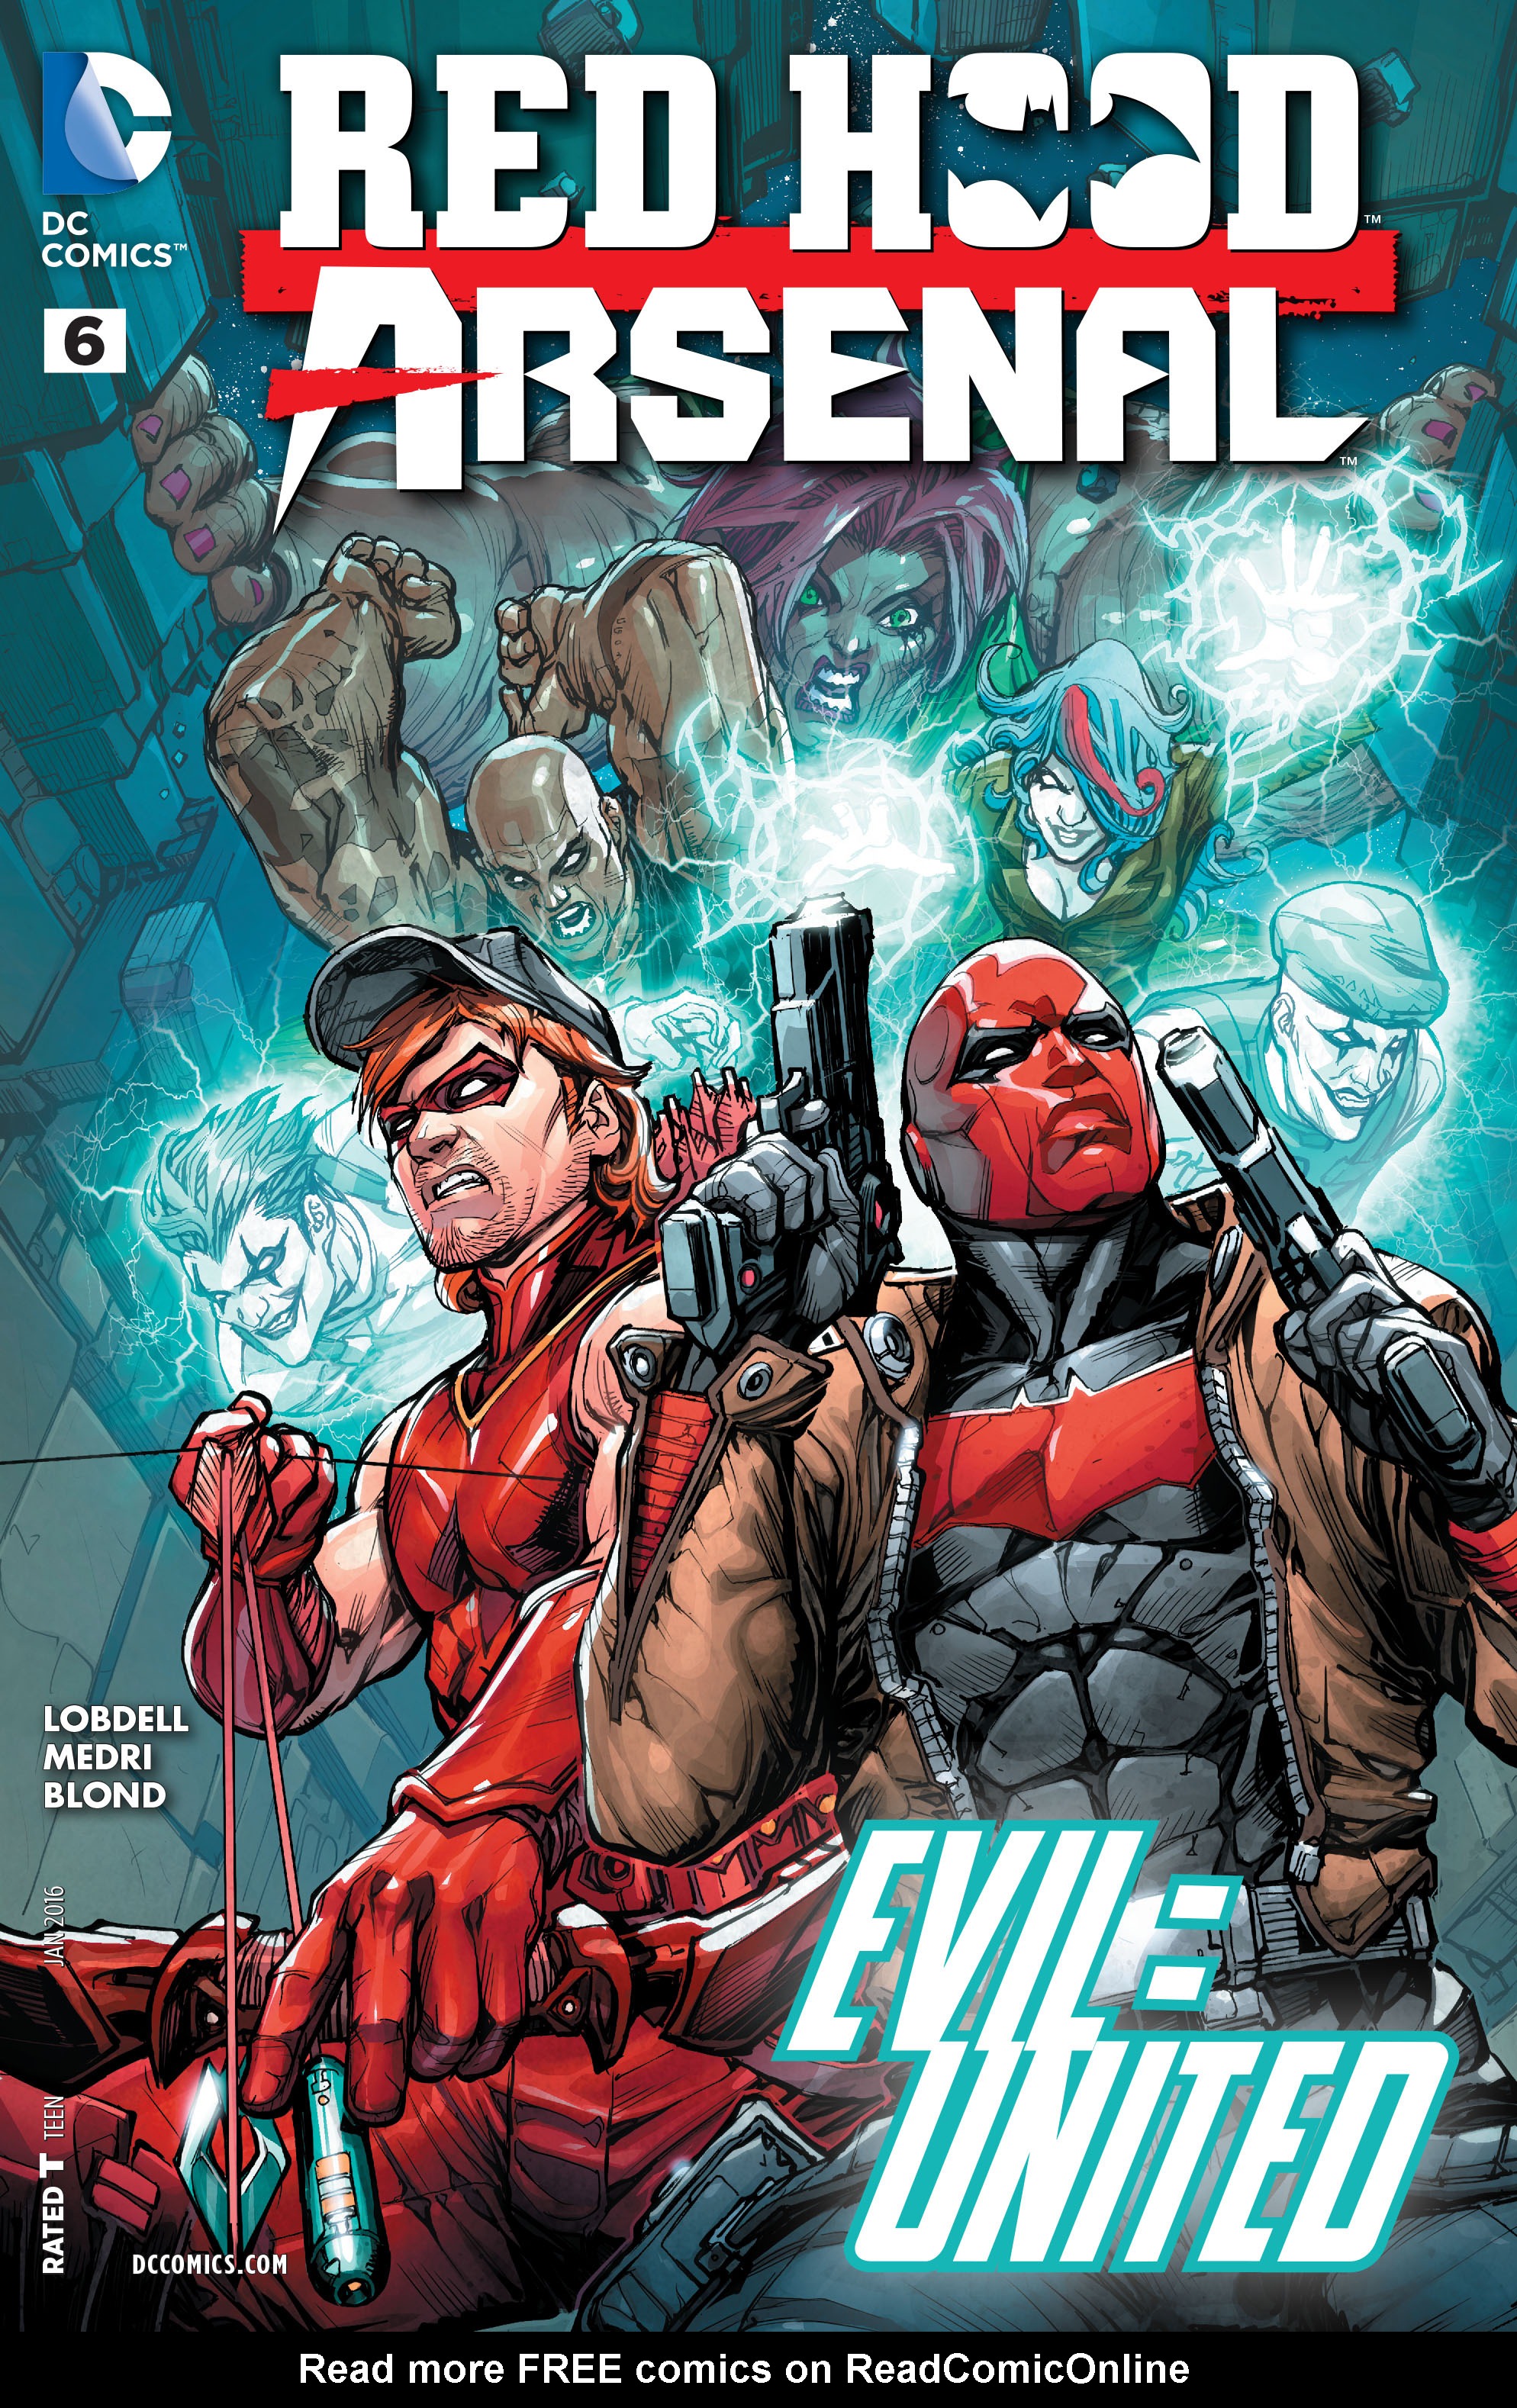 Read online Red Hood/Arsenal comic -  Issue #6 - 1